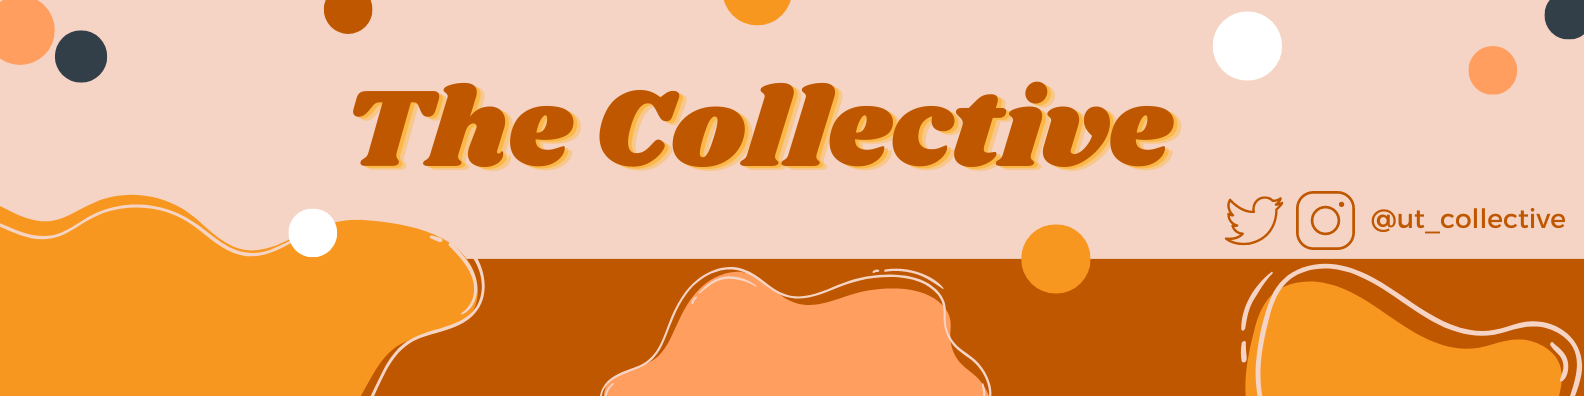 The Collective banner